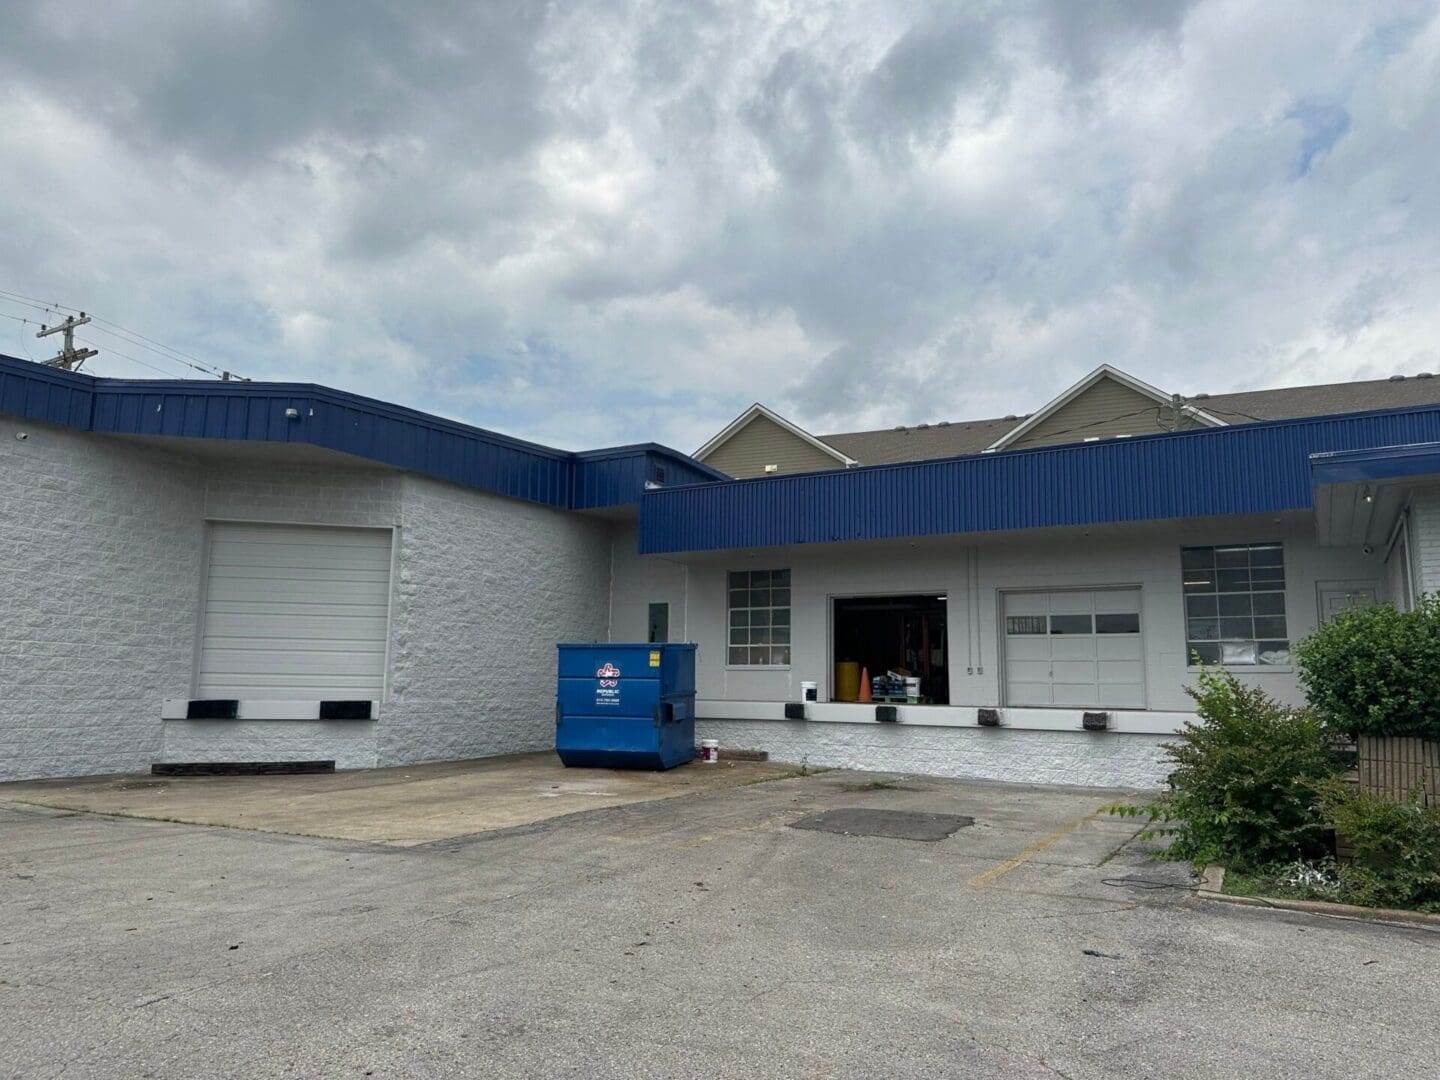 After Commercial Building Painting Lebanon TN